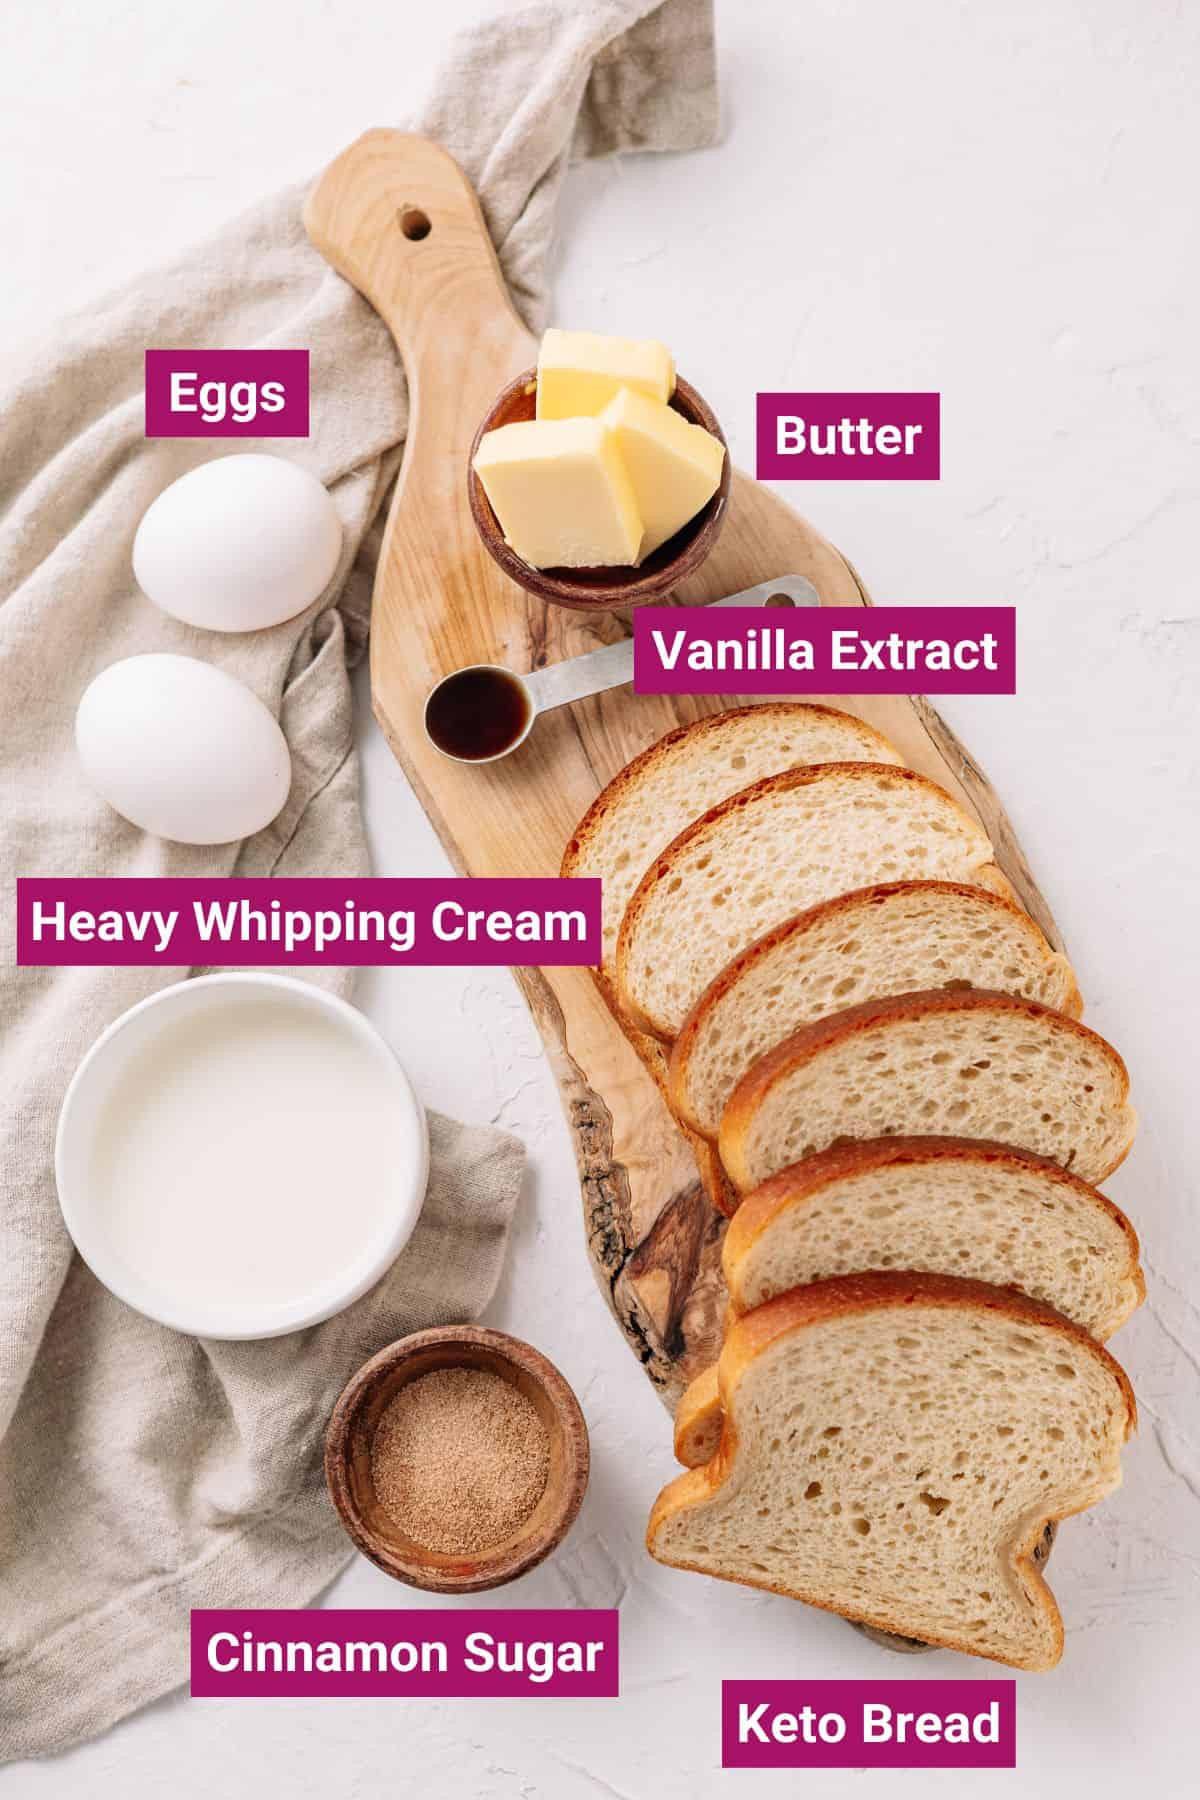 ingredients needed to make keto French toast: butter, eggs, vanilla extract, whipping cream, cinnamon sugar on separate bowls and keto bread on a chopping board